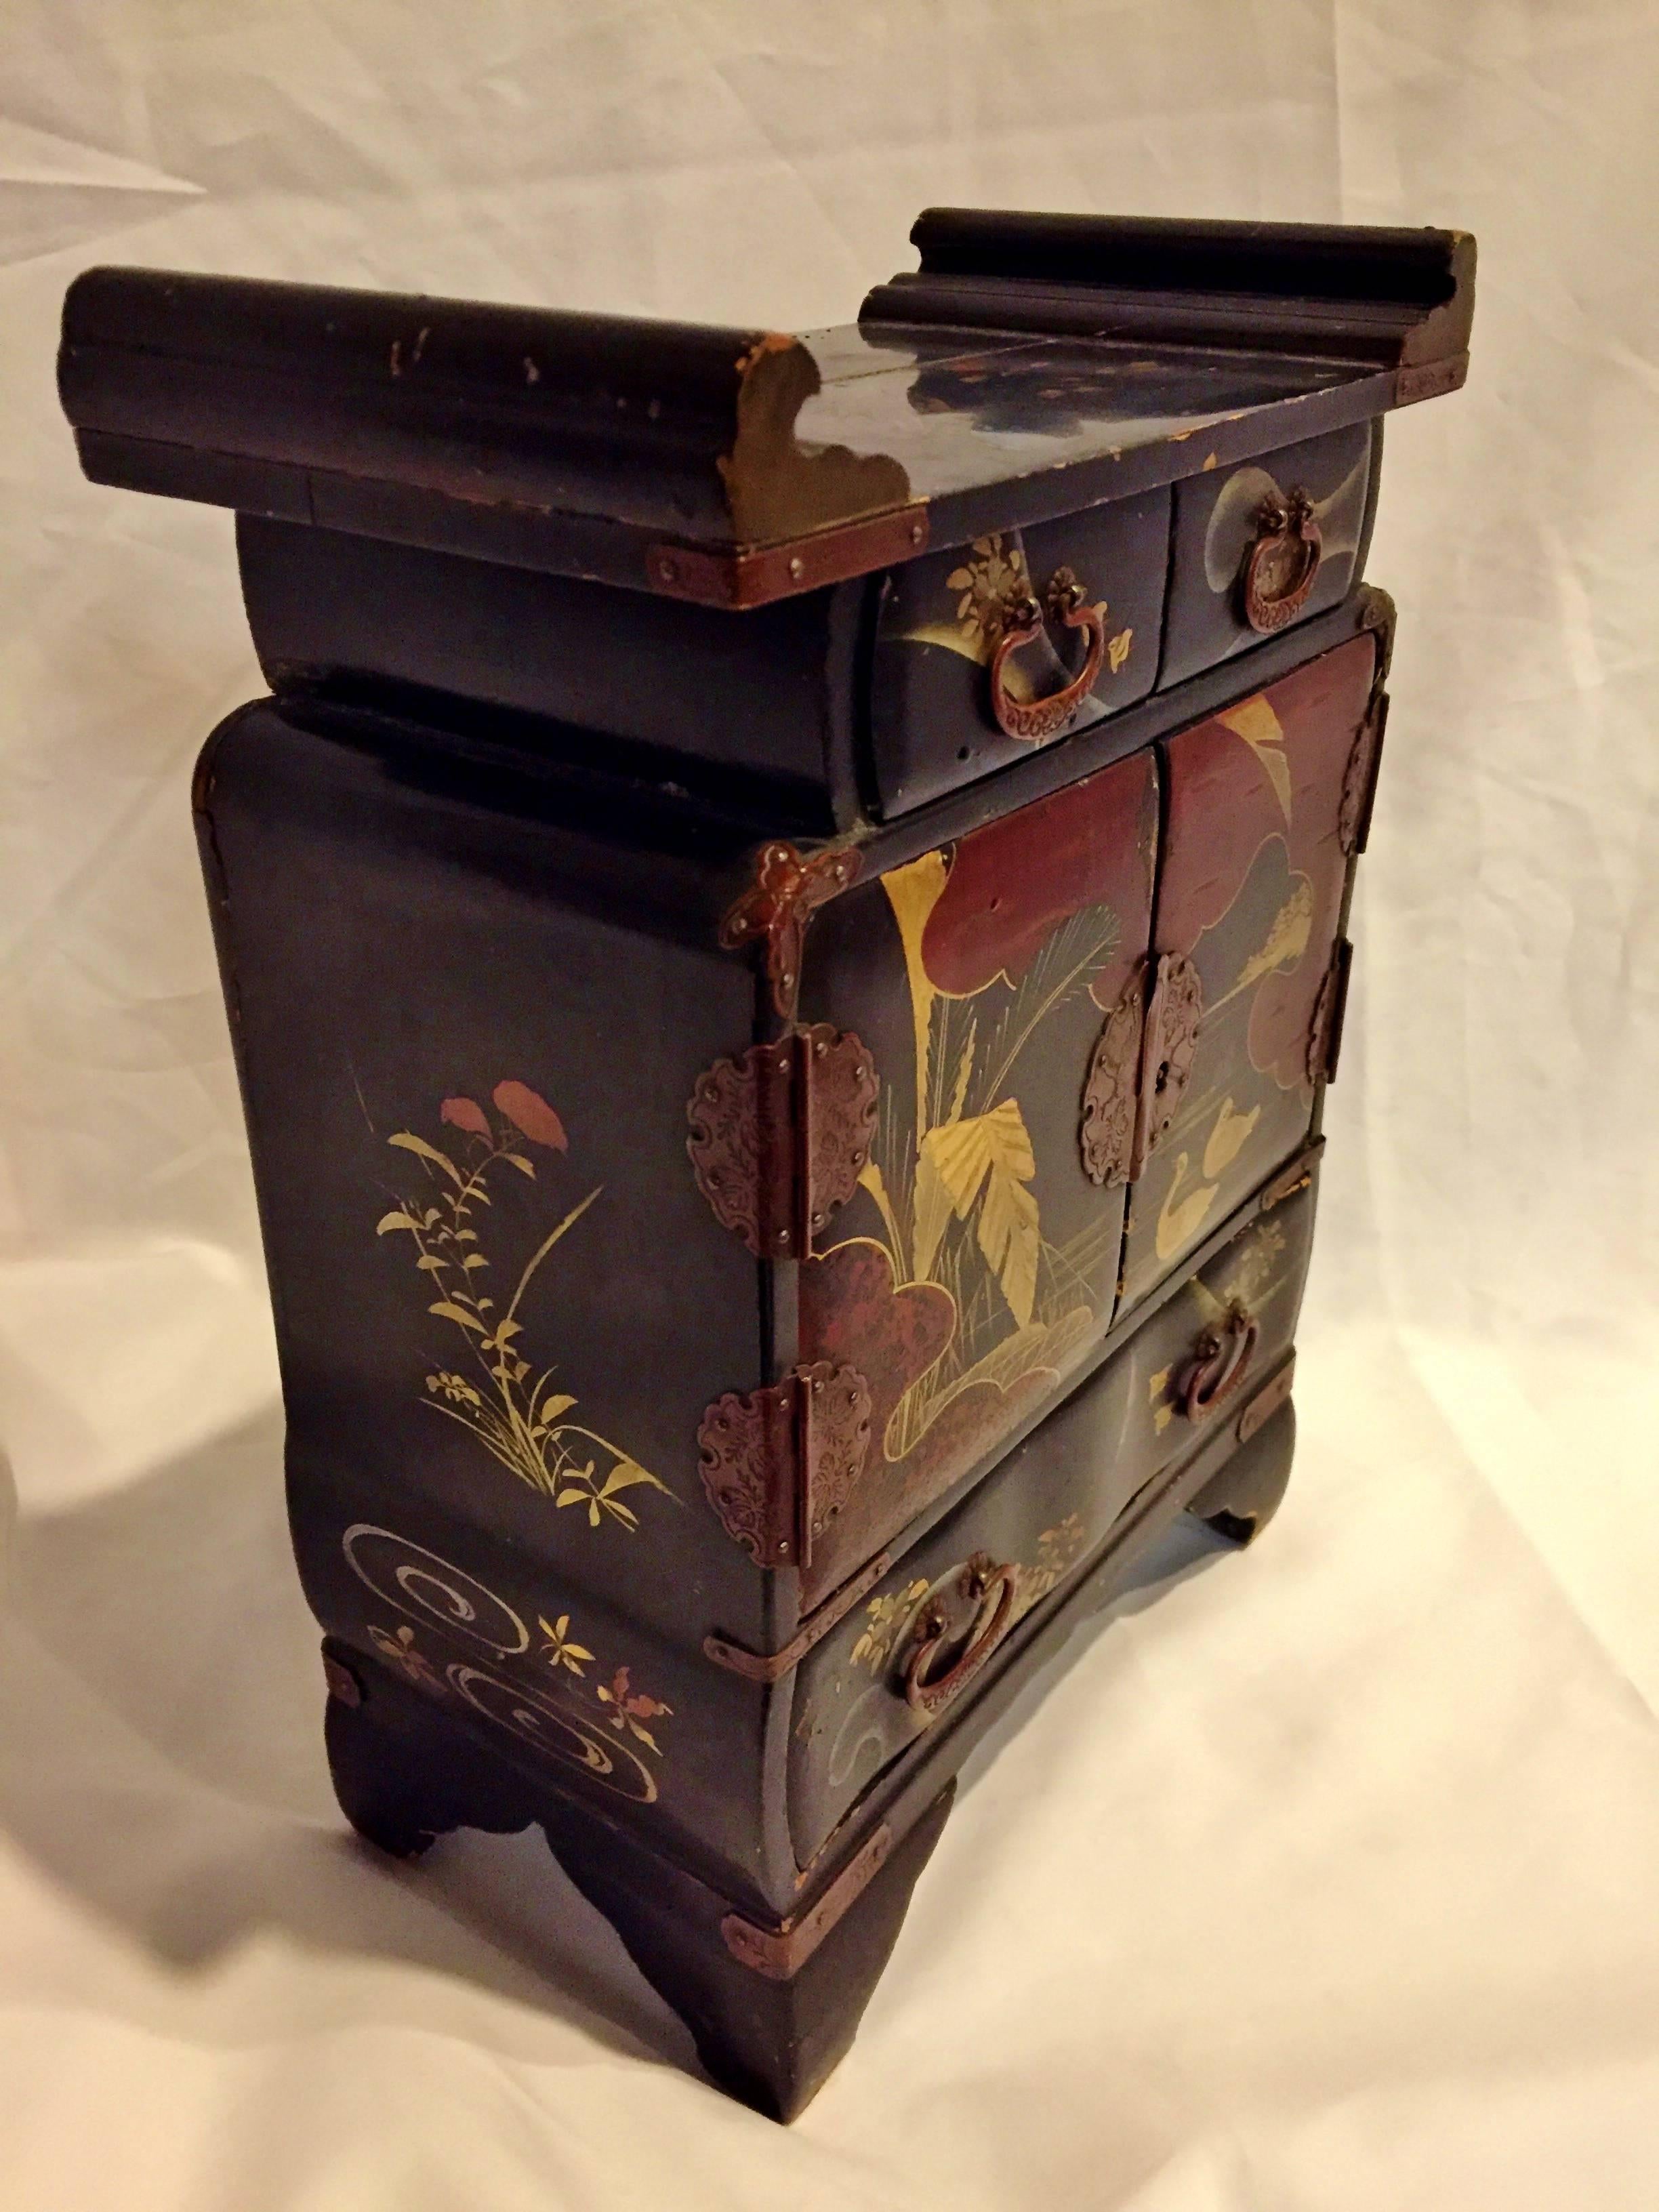 This stunning jewelry box is a jewel itself. Finished in Japanese lacquer, a process that is extremely time consuming and painstaking, this box depicts hand-painted love birds swimming in a lake surrounded by palm trees and birds flying in the sky